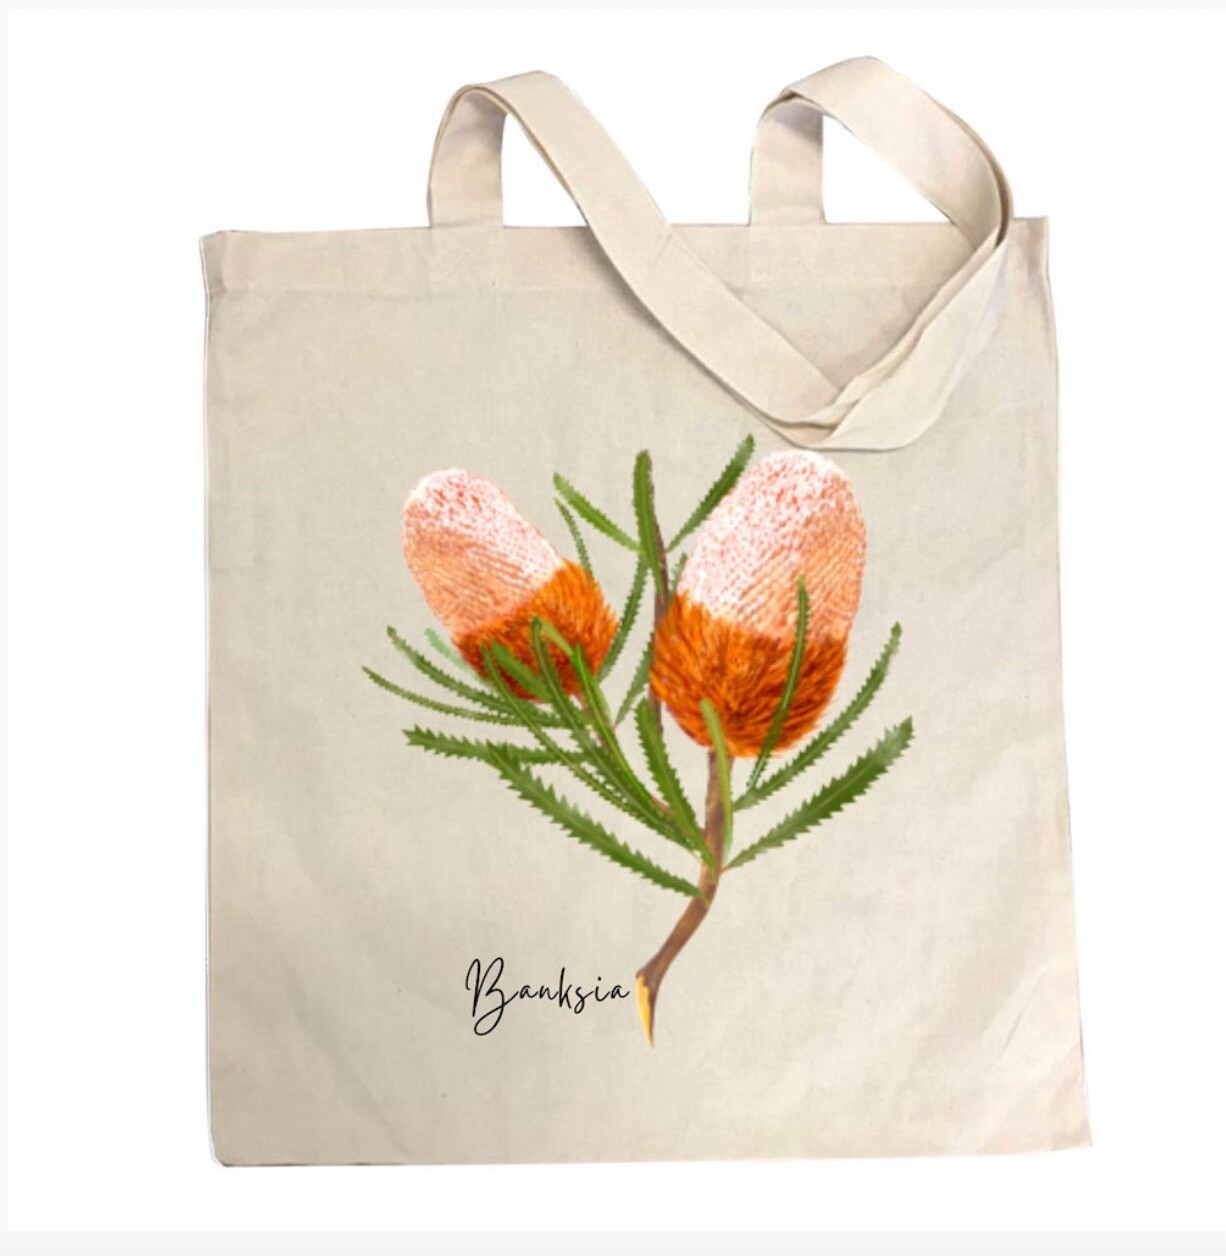 TAYLOR HILL - Tote Bag Cotton -  Banksia